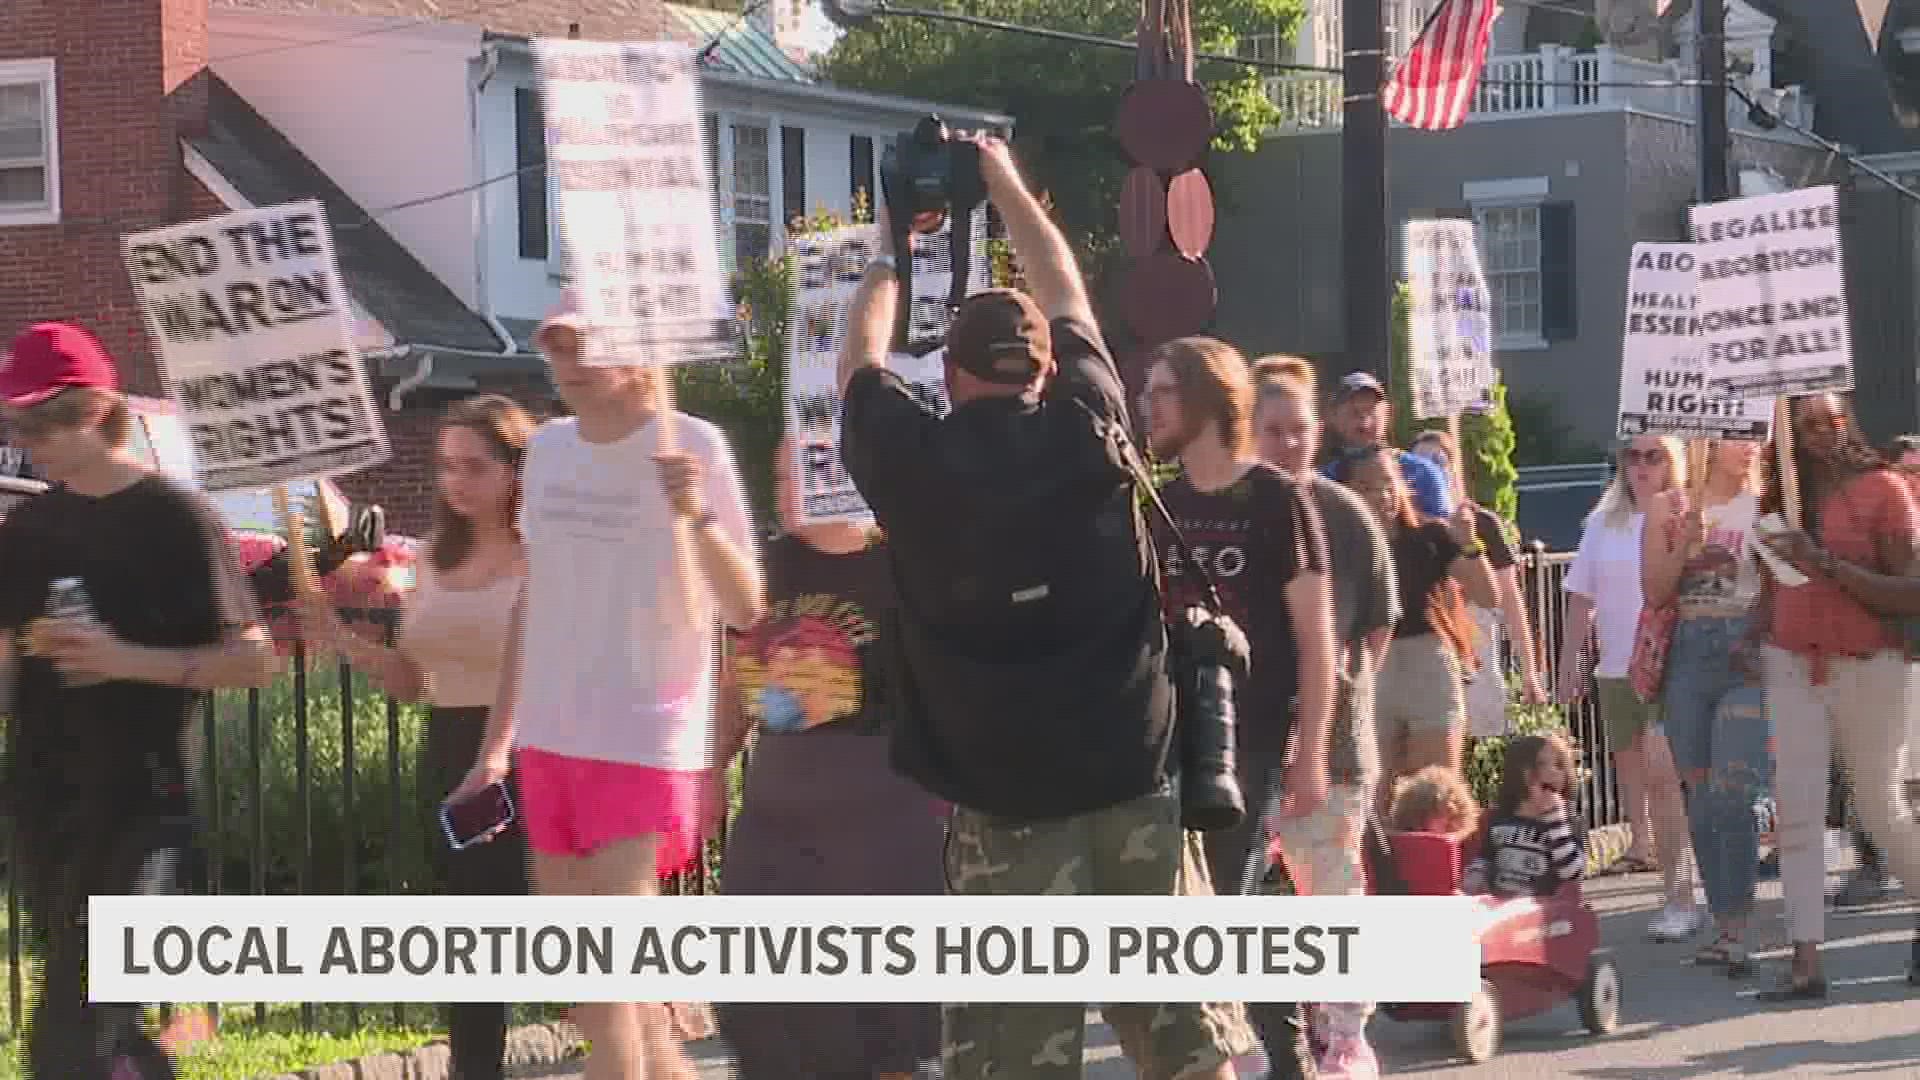 Hundreds of protesters gathered to protest the SCOTUS ruling to overturn Roe v. Wade